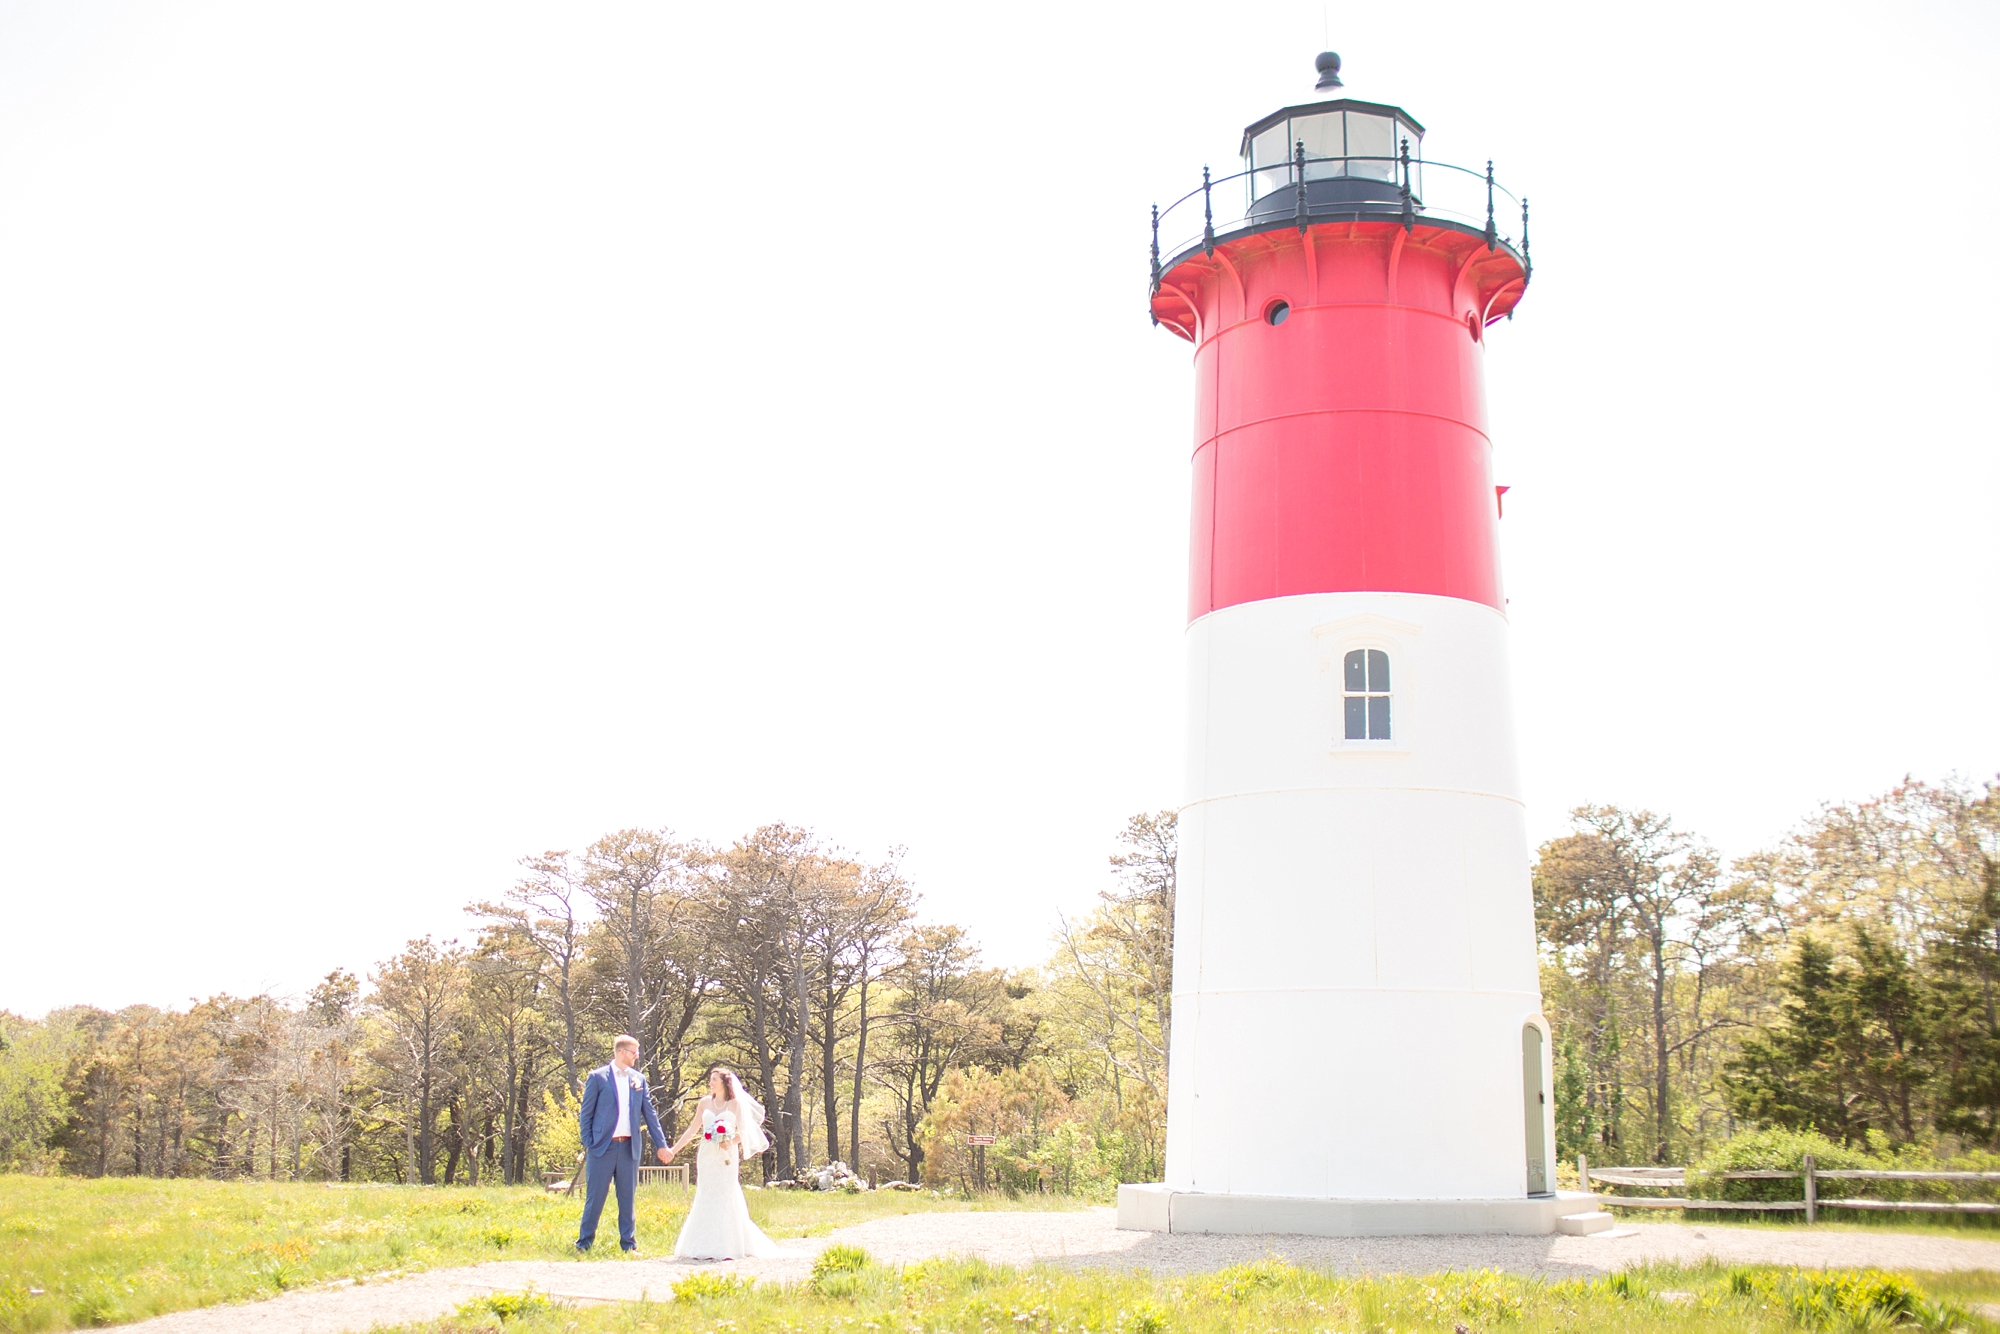  Yay for a lighthouse that matched the wedding colors! 